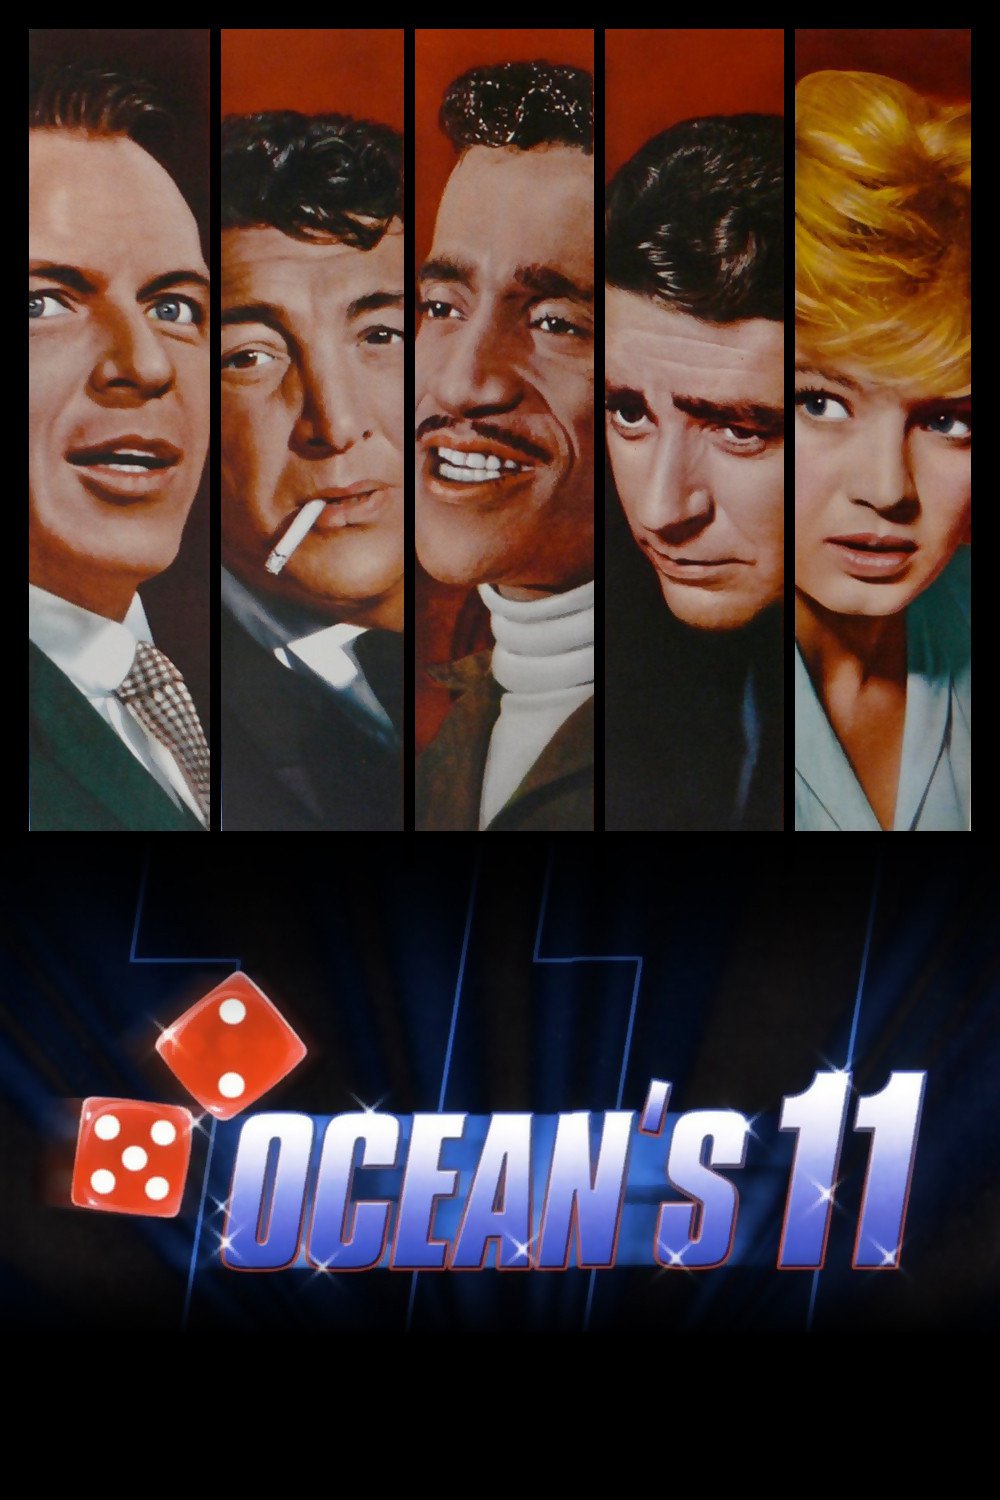 Poster for the movie "Ocean's Eleven"